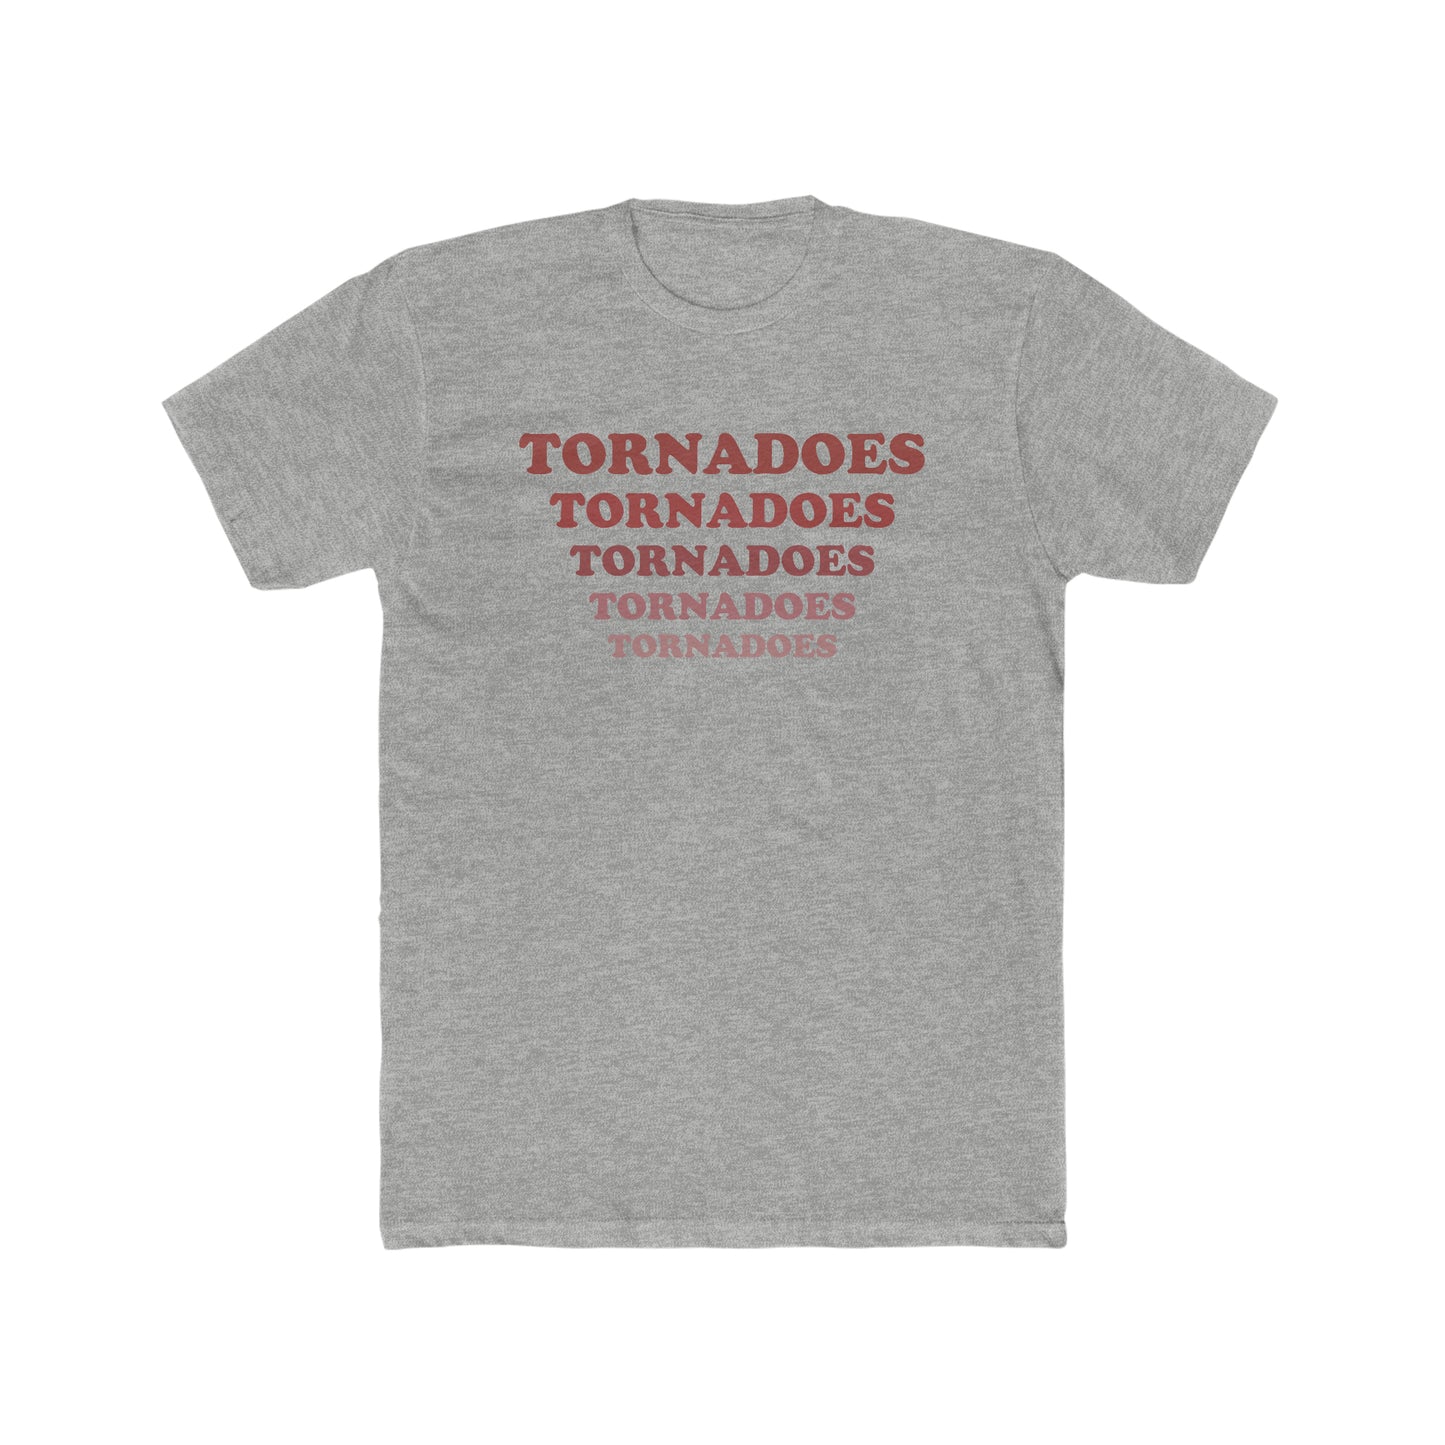 Tornadoes Tornadoes Tee - Never Stop Chasing